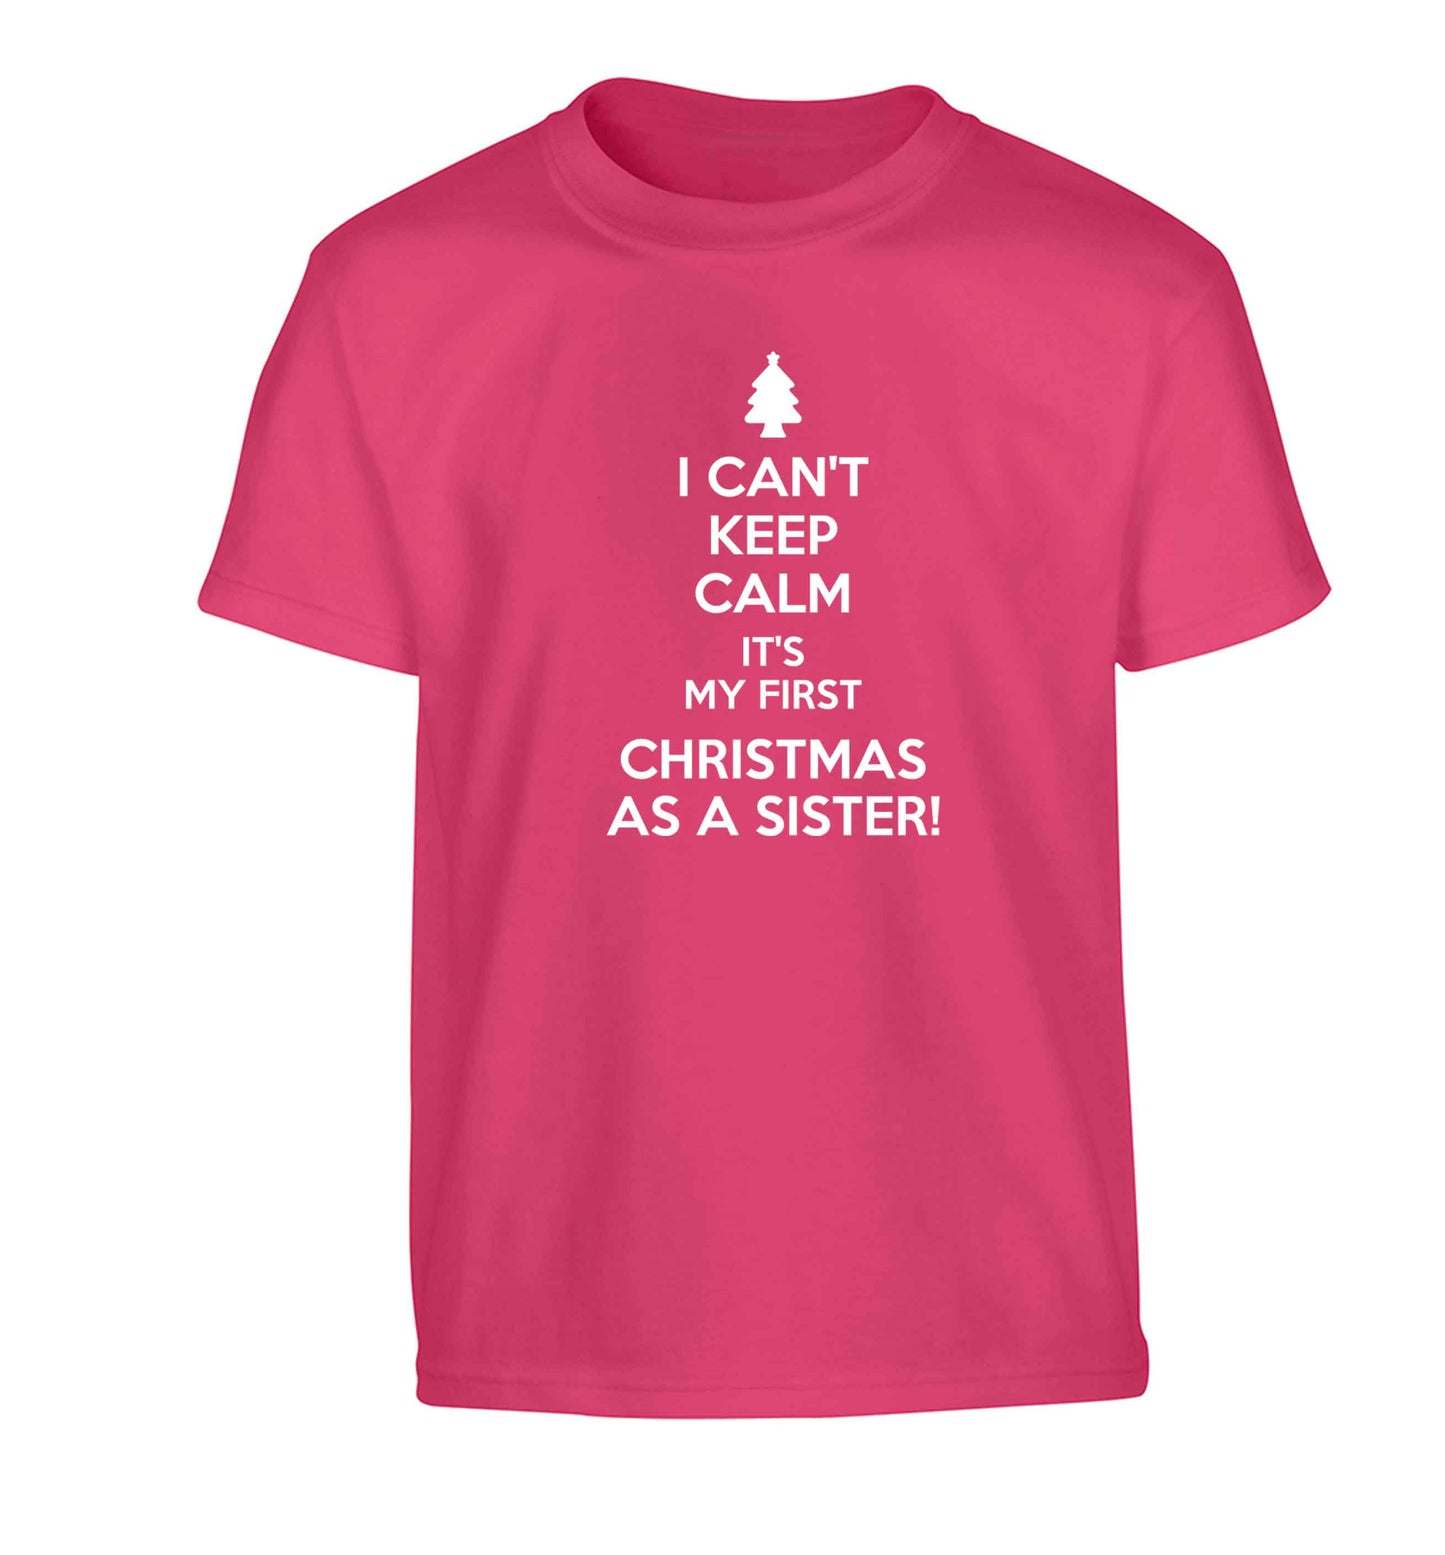 I can't keep calm it's my first Christmas as a sister! Children's pink Tshirt 12-13 Years